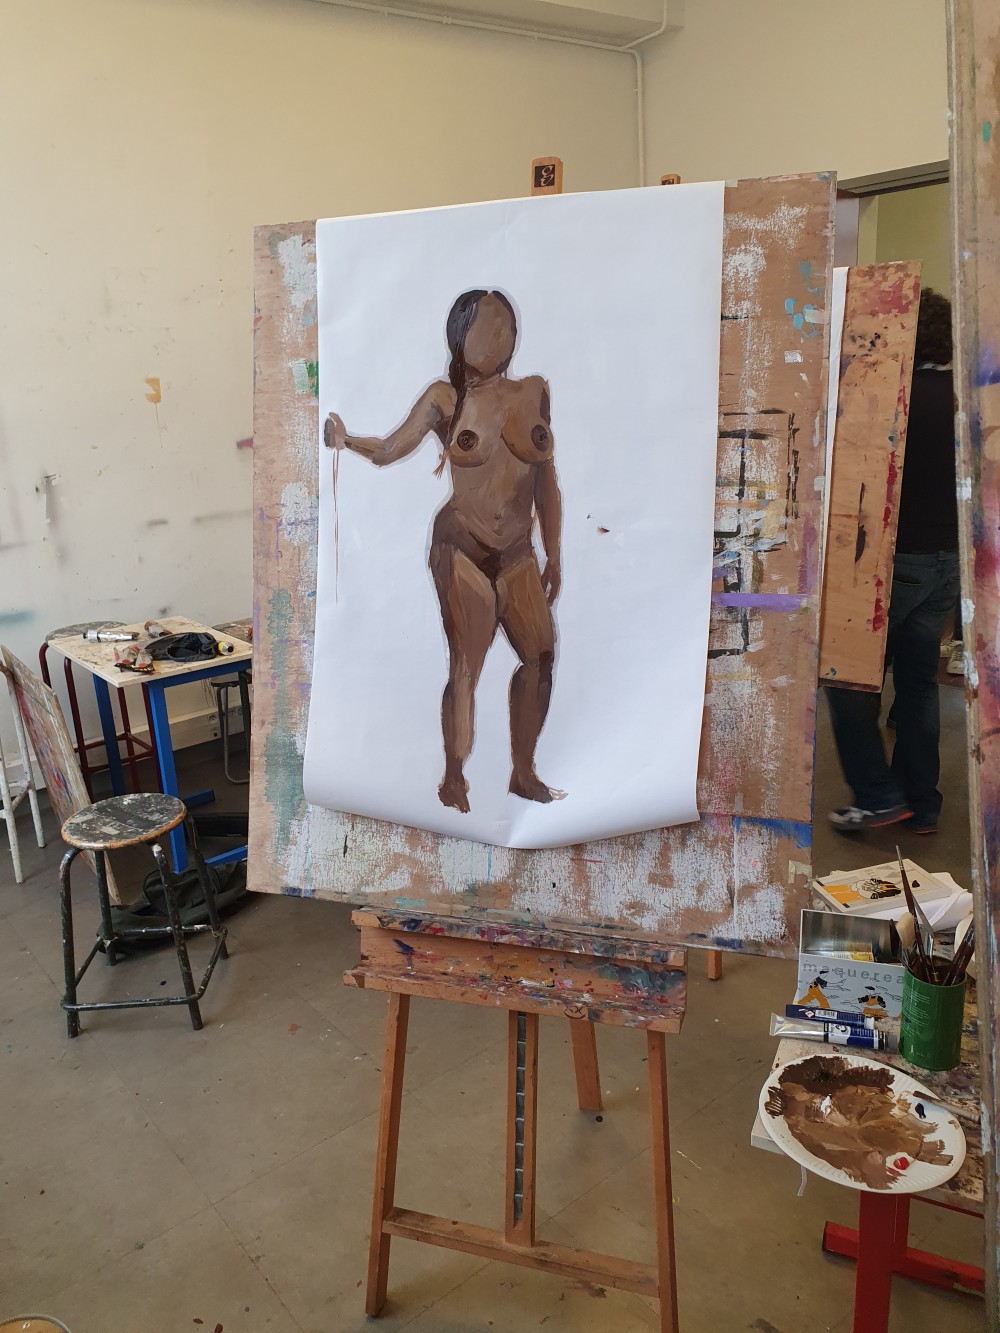 Setup during the class: a painting of a woman standing, on a easel, next
to a small table with paint tubes and brushes.